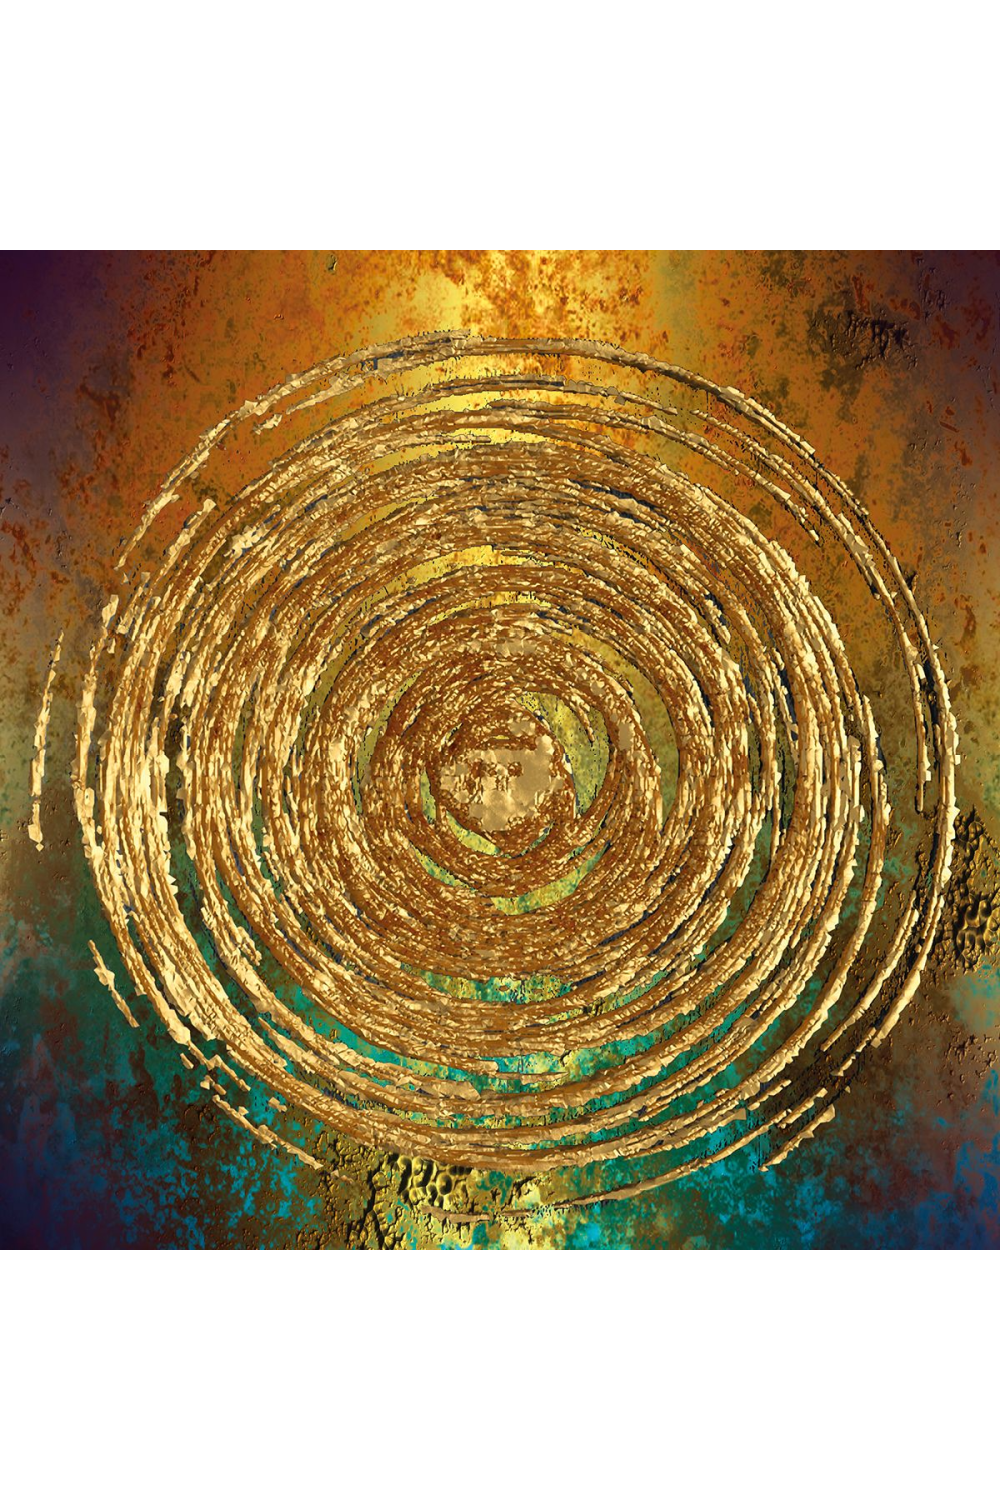 Gold Spiral Photographic Art | Andrew Martin My Golden Years | Oroa.com